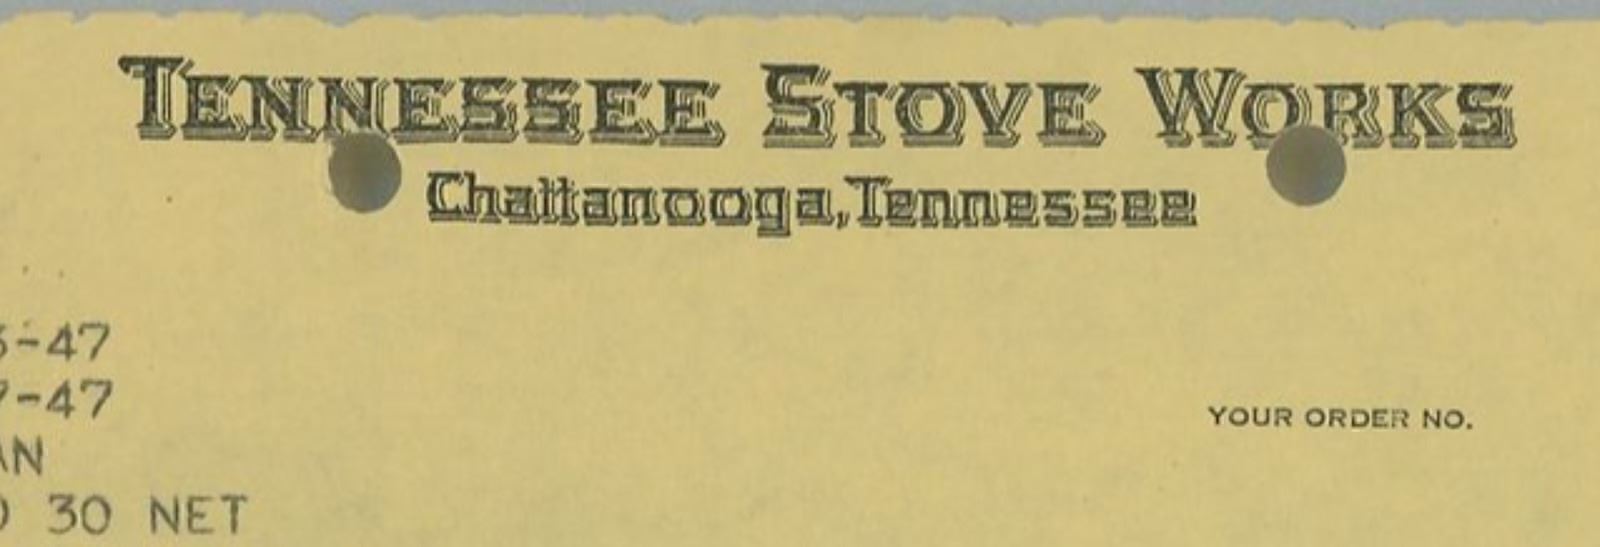 1947 Tennessee Stove Works Chattanooga TN Modern Maid Stove Invoice 423